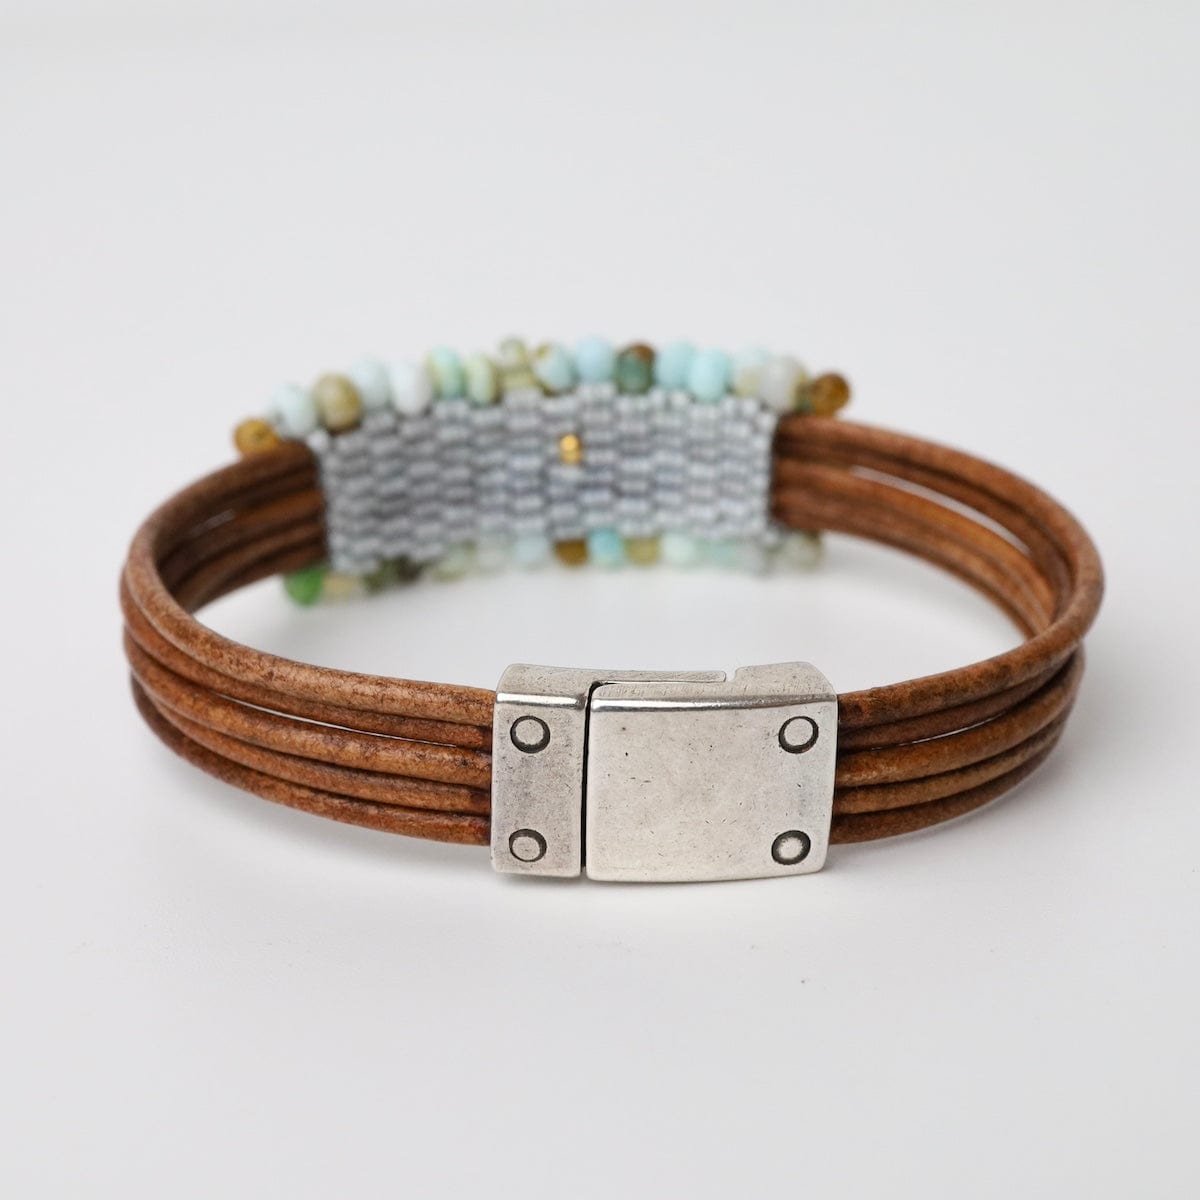 BRC-JM Hand Stitched Green Opal with Silver Nugget Leather Bracelet